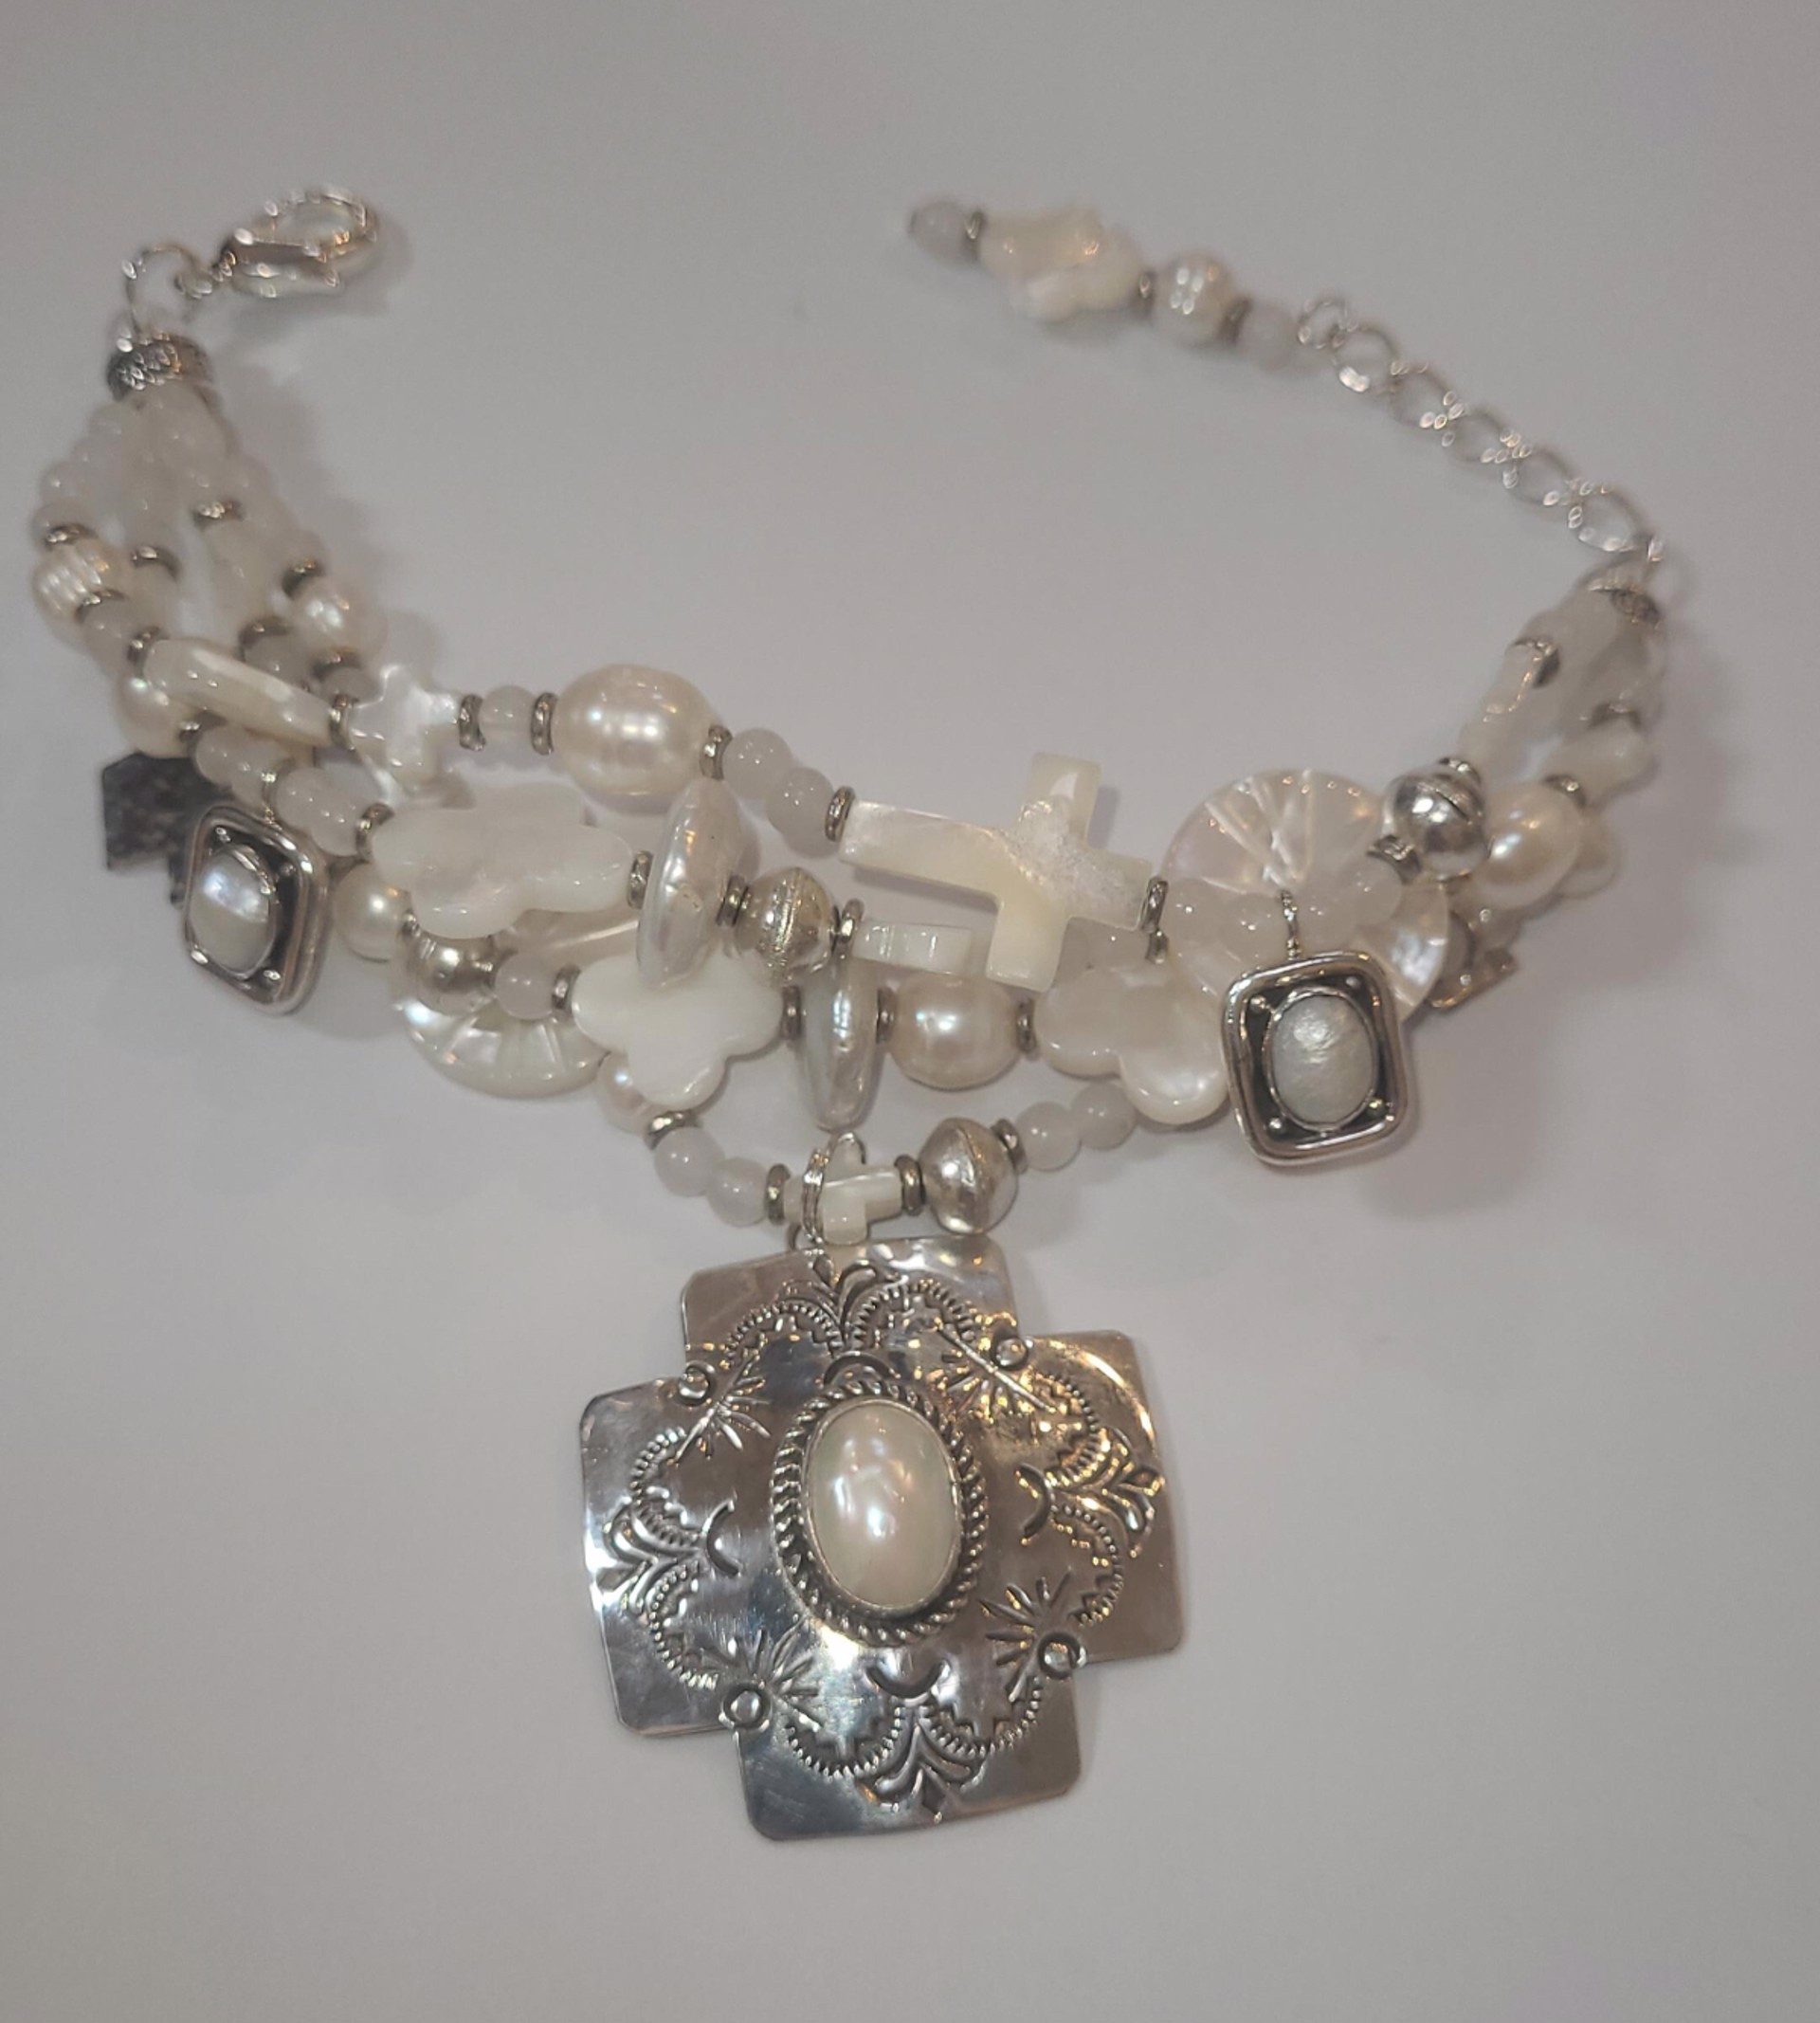 Bracelet - Pearls, Vintage White Beads, with Sterling Silver Crosses KY 1496 by Kim Yubeta